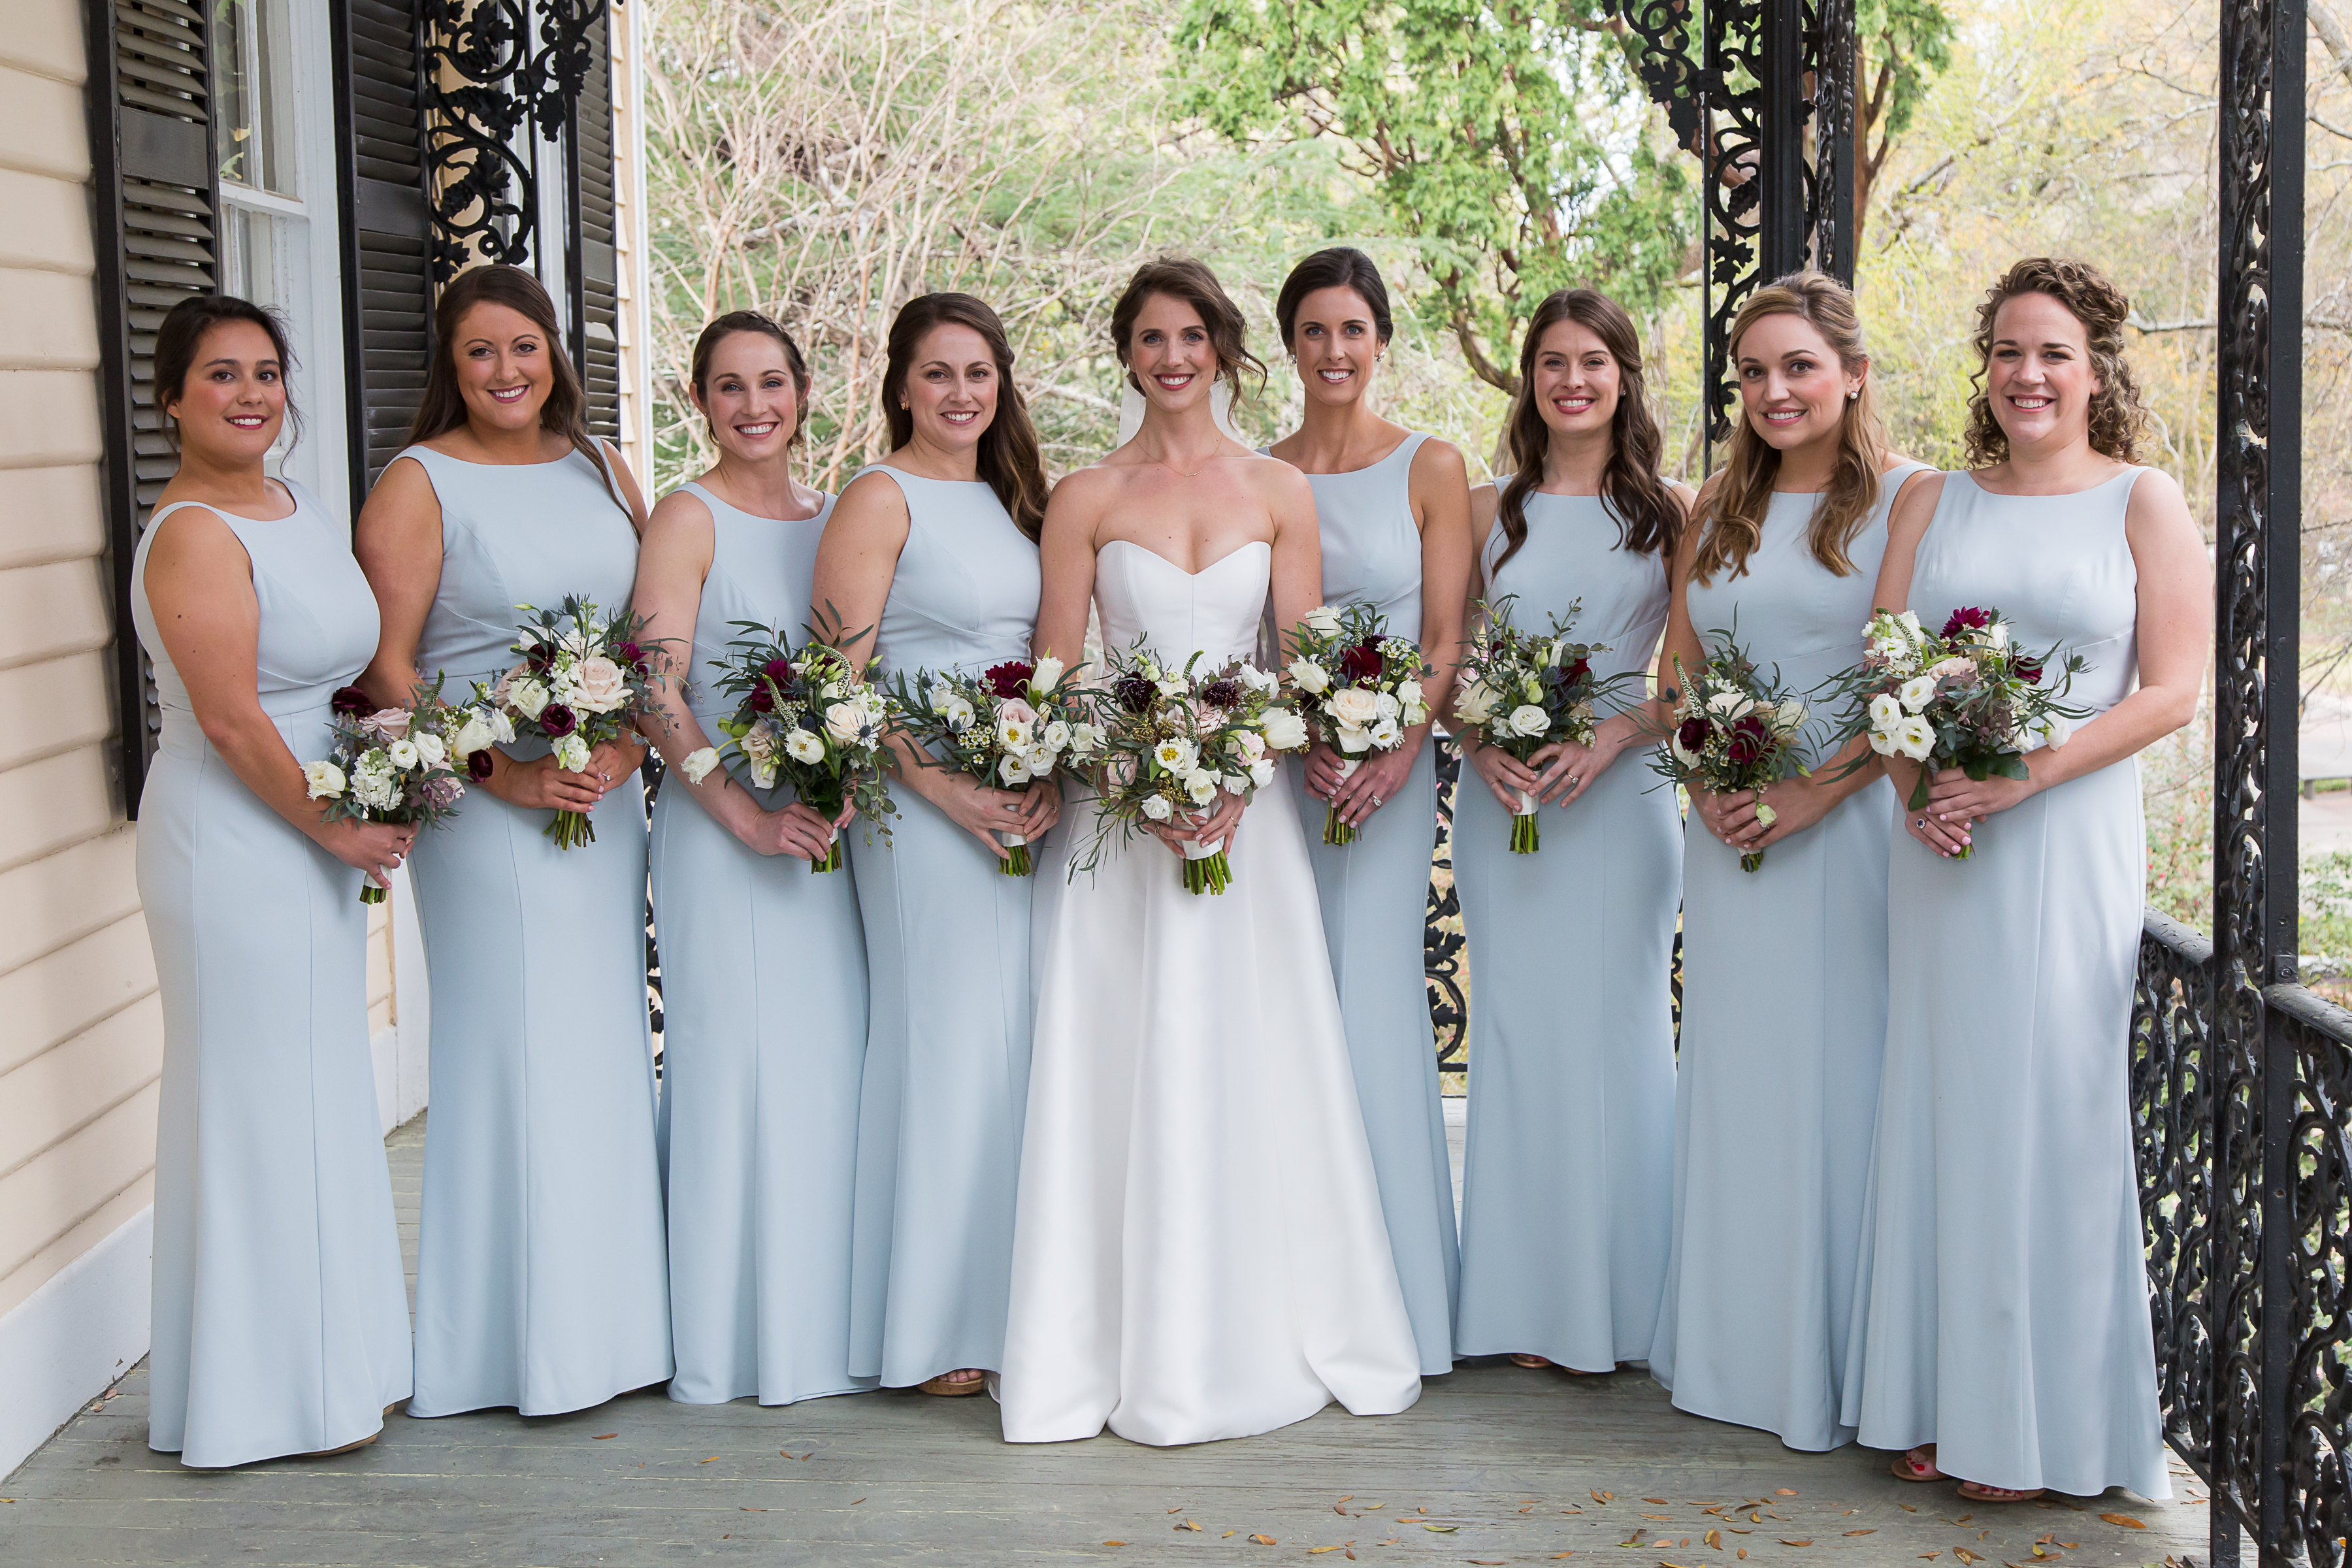  The bridesmaids assembled on the porch of the Lace House just moments before heading to the ceremony. Celine Roustan, Allie Herskovitz, Sarah Fitz-Maurice, Katie Herskovitz, Mary Rogers McMaster Herskovitz, Virginia Roach McMaster, Emily Burgis, Paige Whalen, Lise Hensel. 